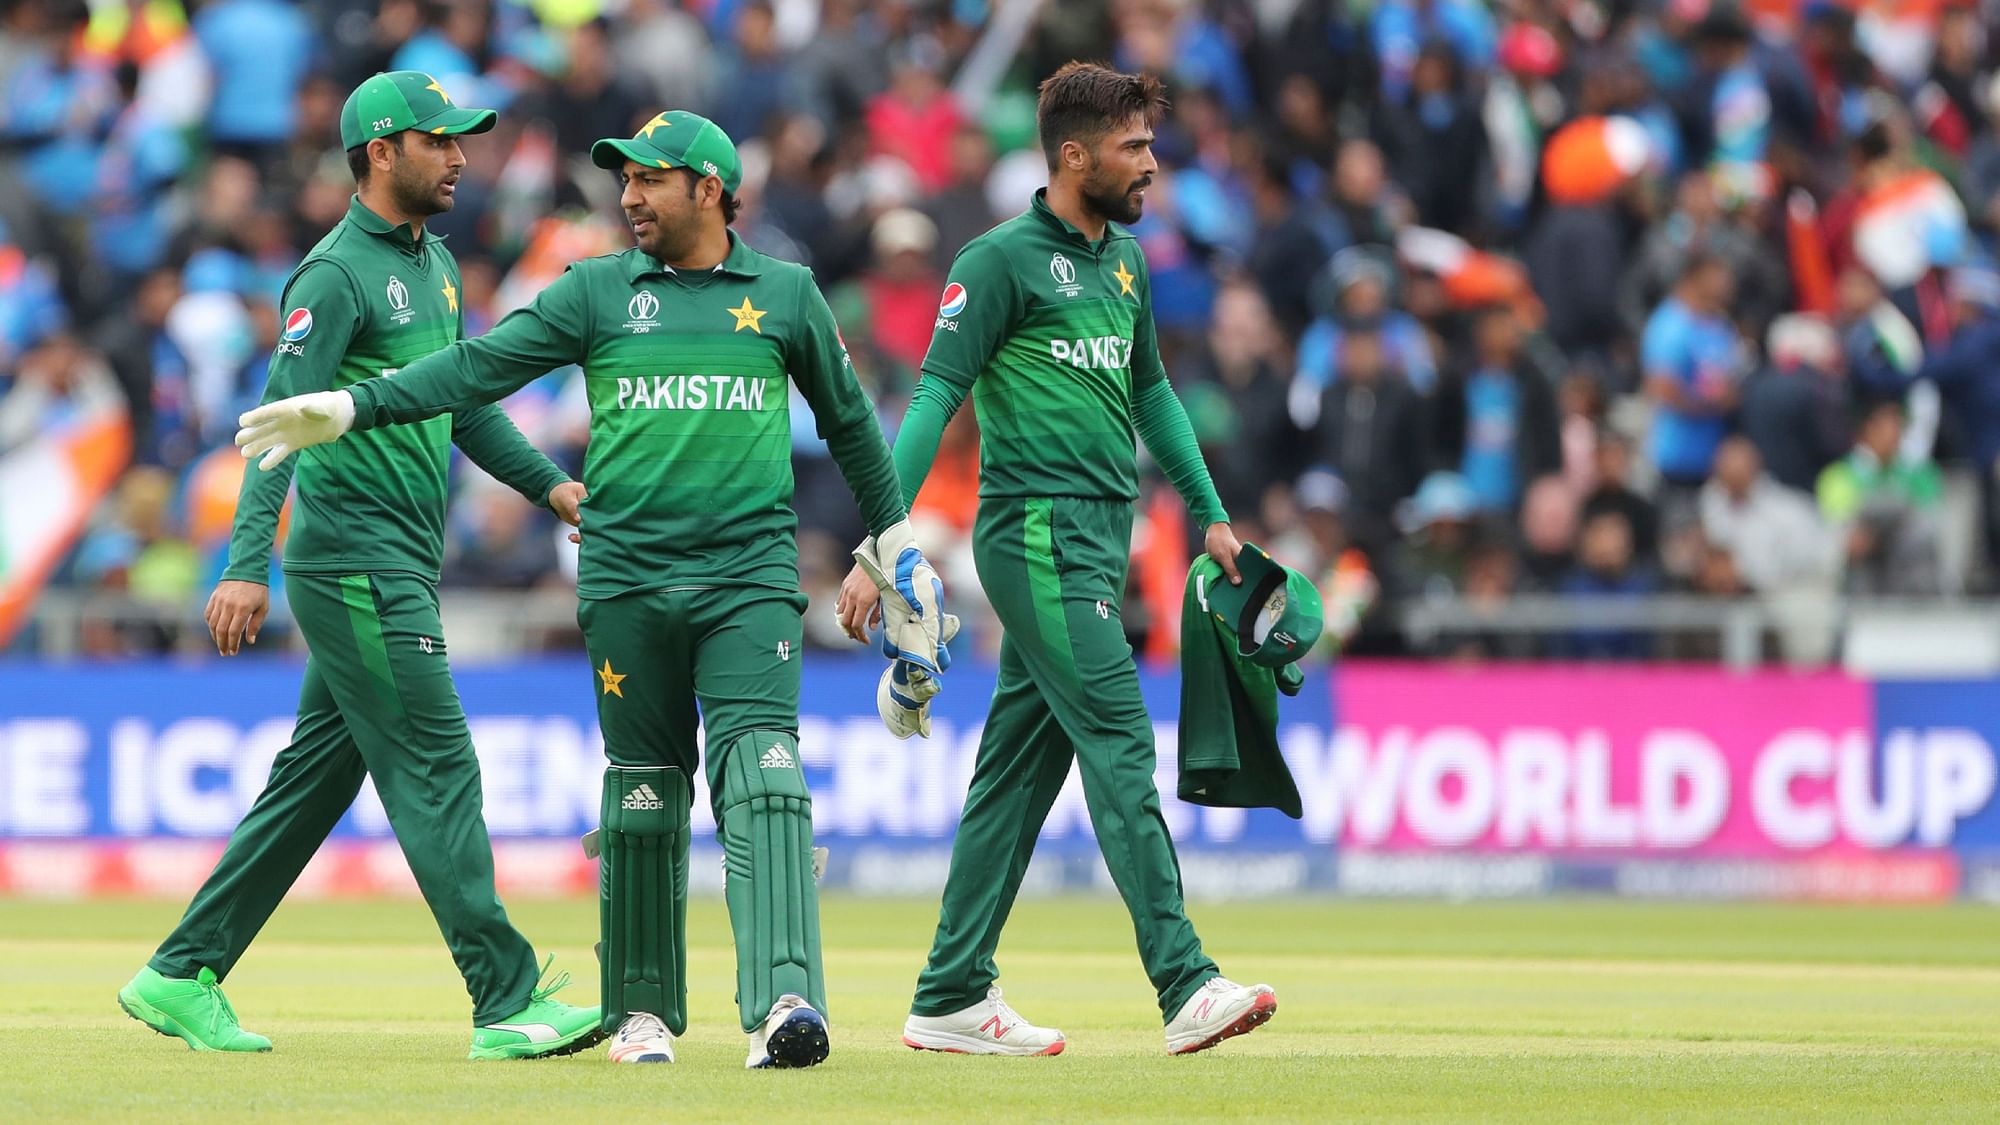 Pakistan’s captain Sarfaraz Ahmed (Centre) with team players during match against India on Sunday, 16 June.